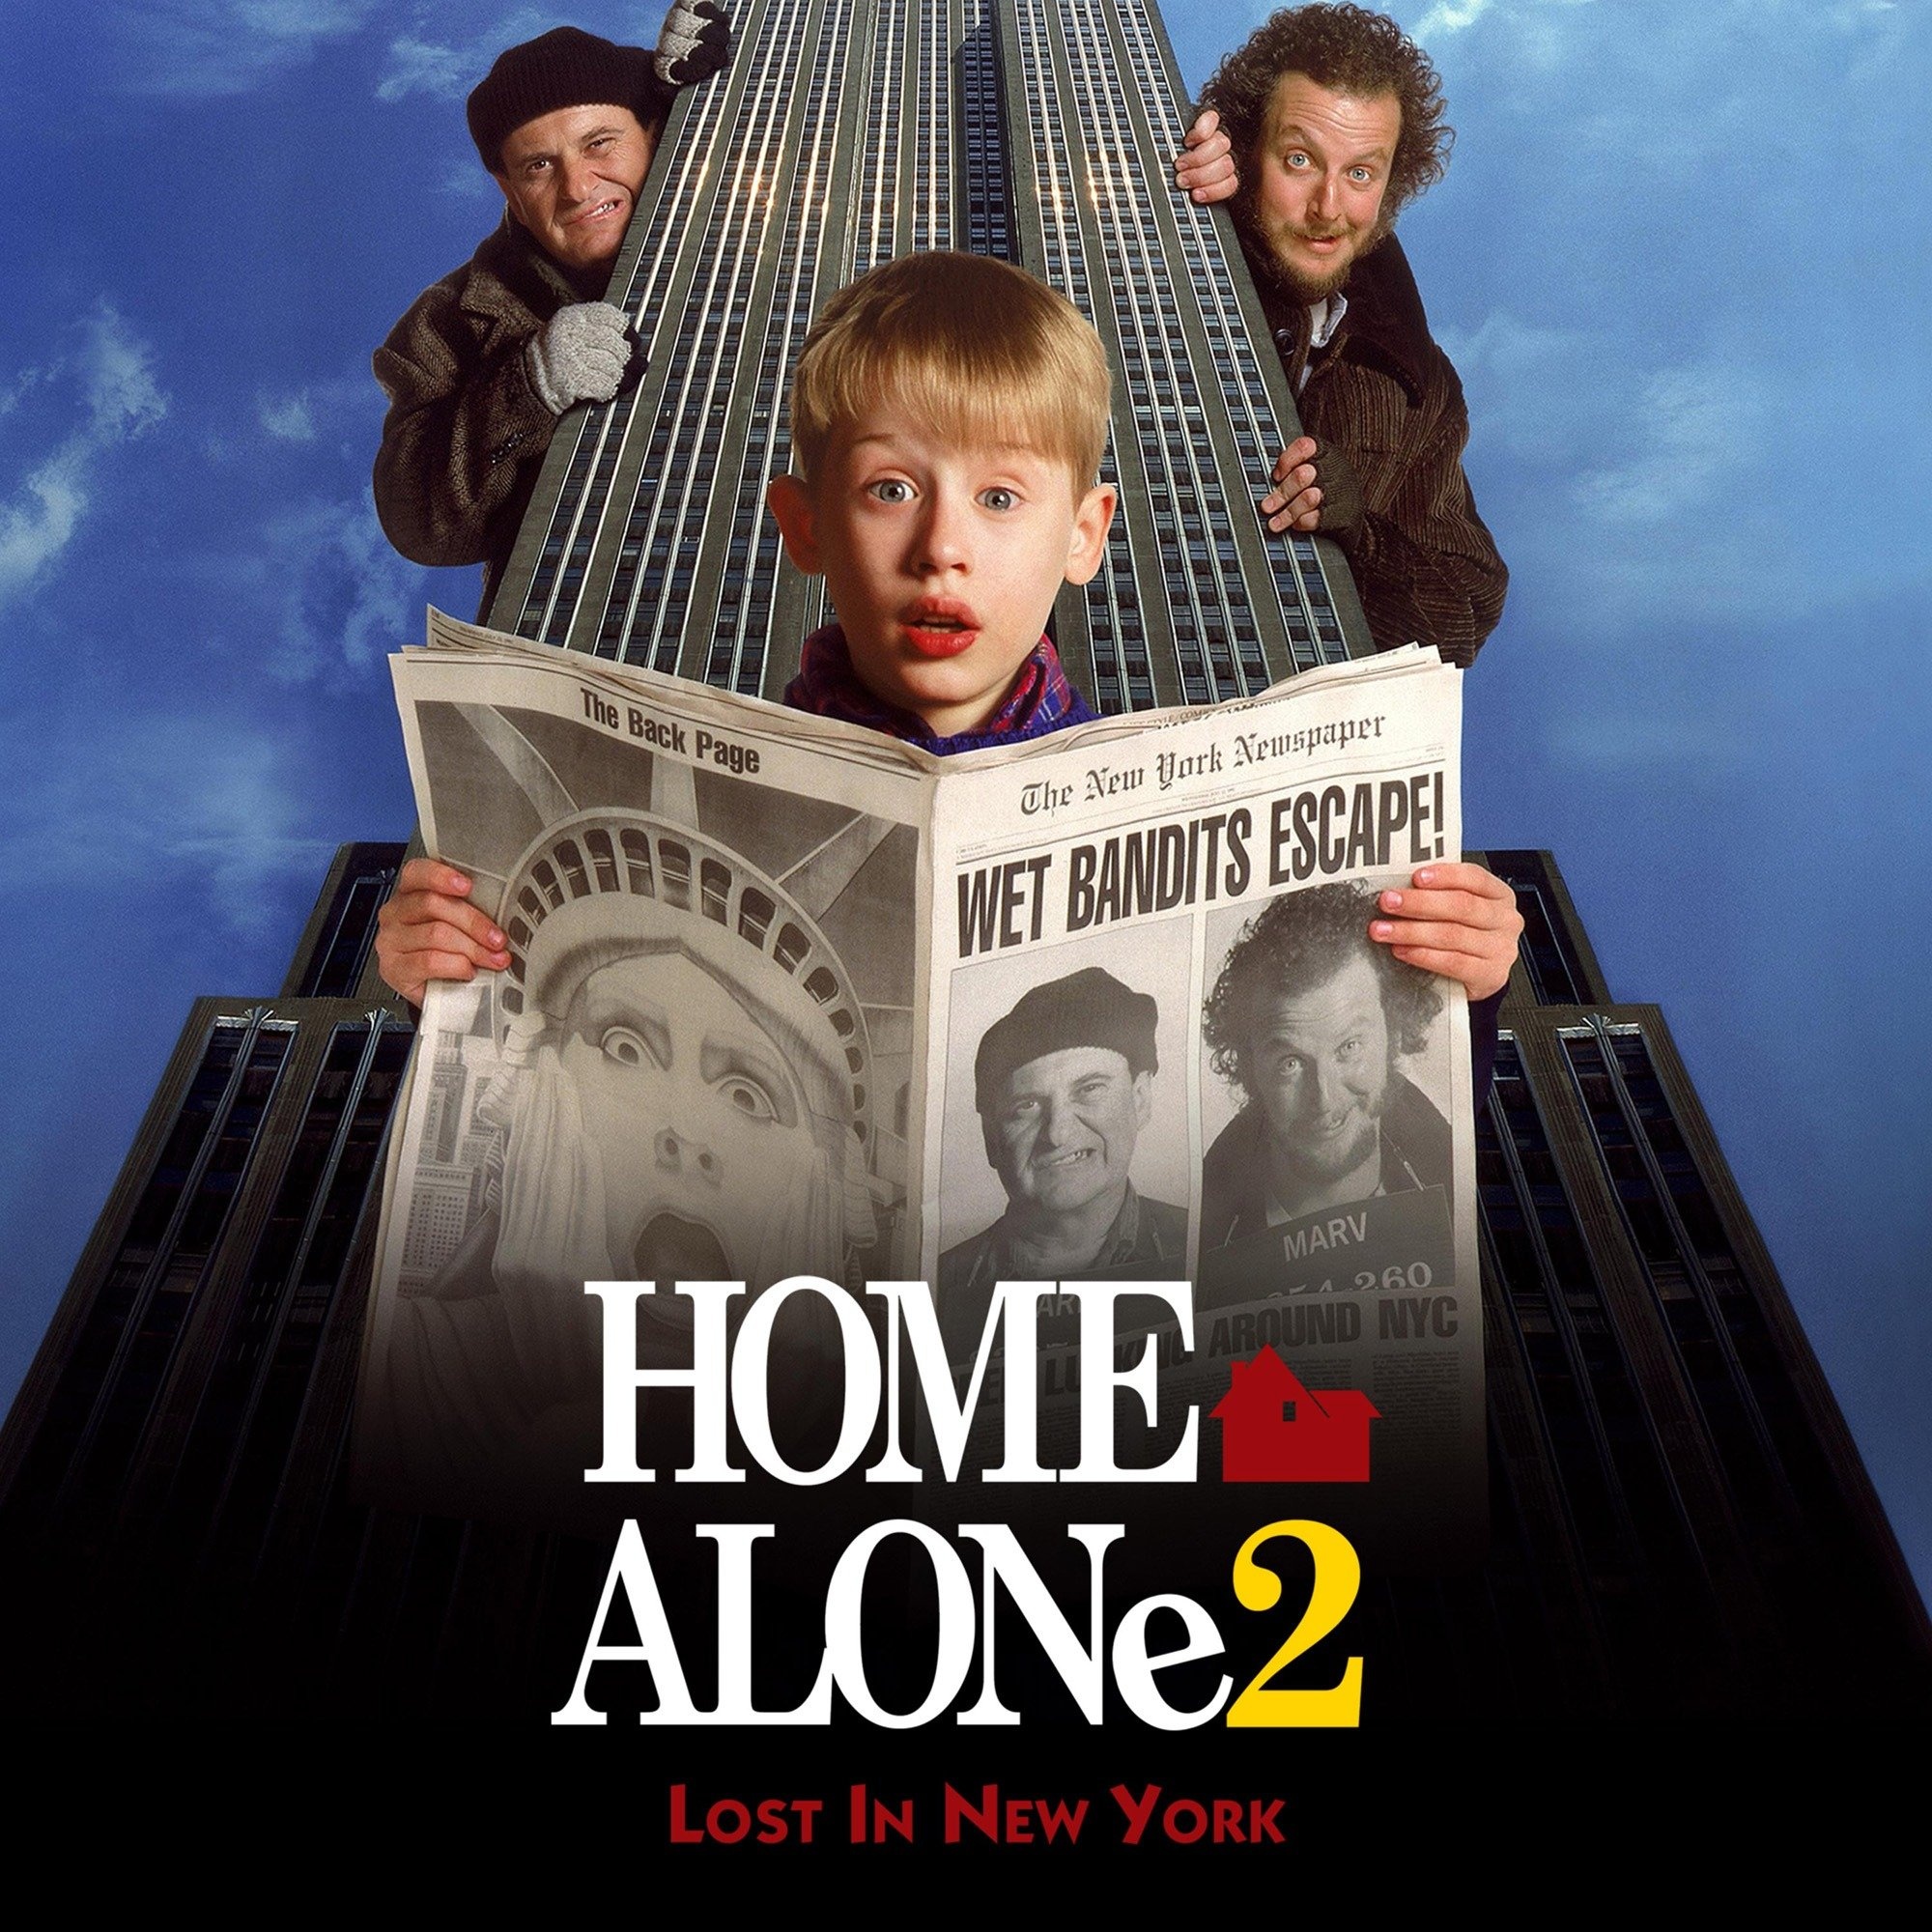 Home Alone 2, Online movie streaming, Kevin McCallister's New York adventure, Fun-filled comedy, 2000x2000 HD Phone